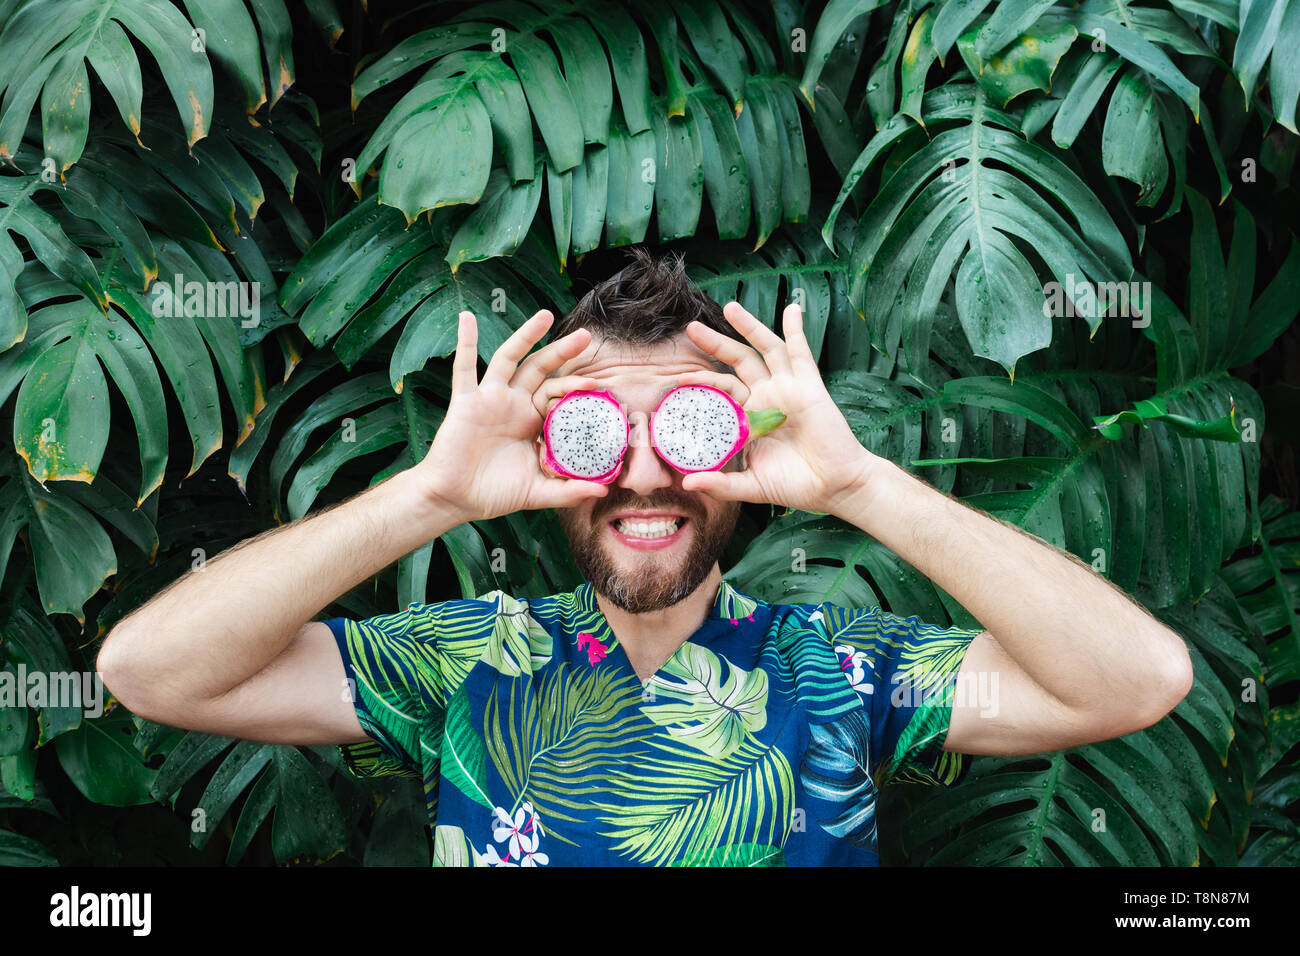 Young bearded man holding slices of Pitaya dragon fruit in front of his eyes, laughing. Tropical leaves background, copy space. Stock Photo